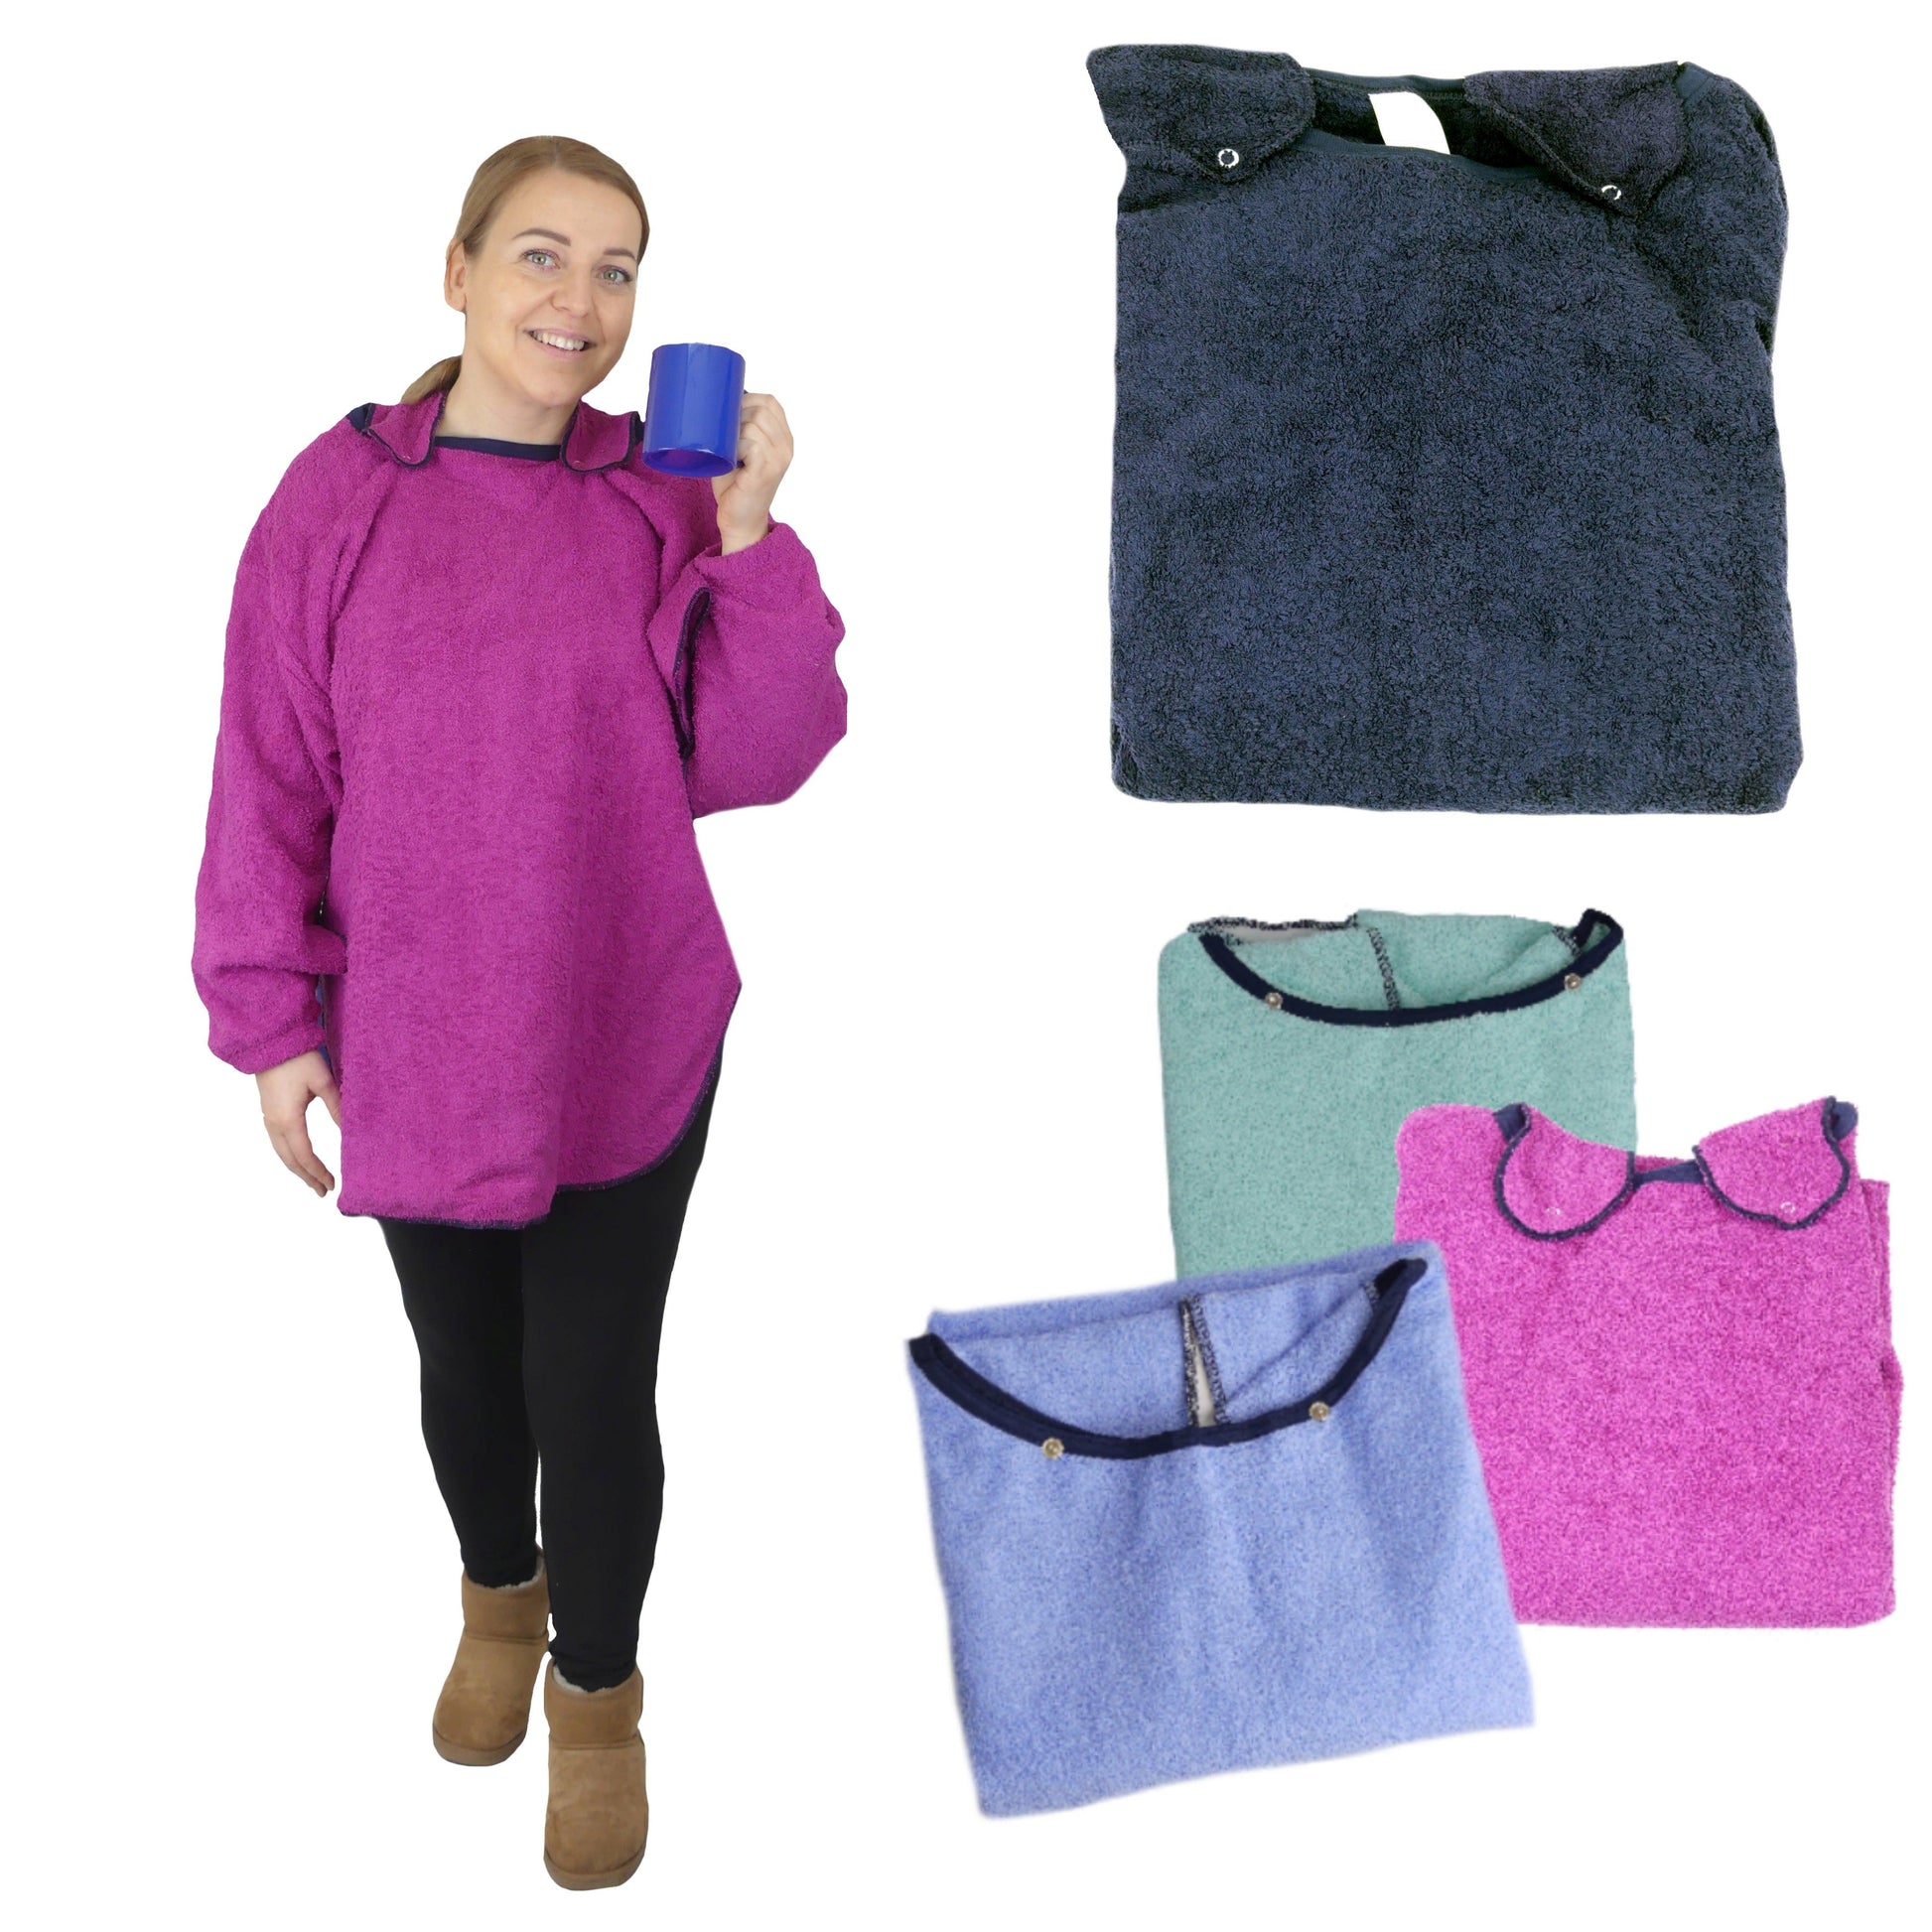 Eating and Drinking Aids: Towelling Feeding Cape with Waterproof Backing - M027 - MEDORIS